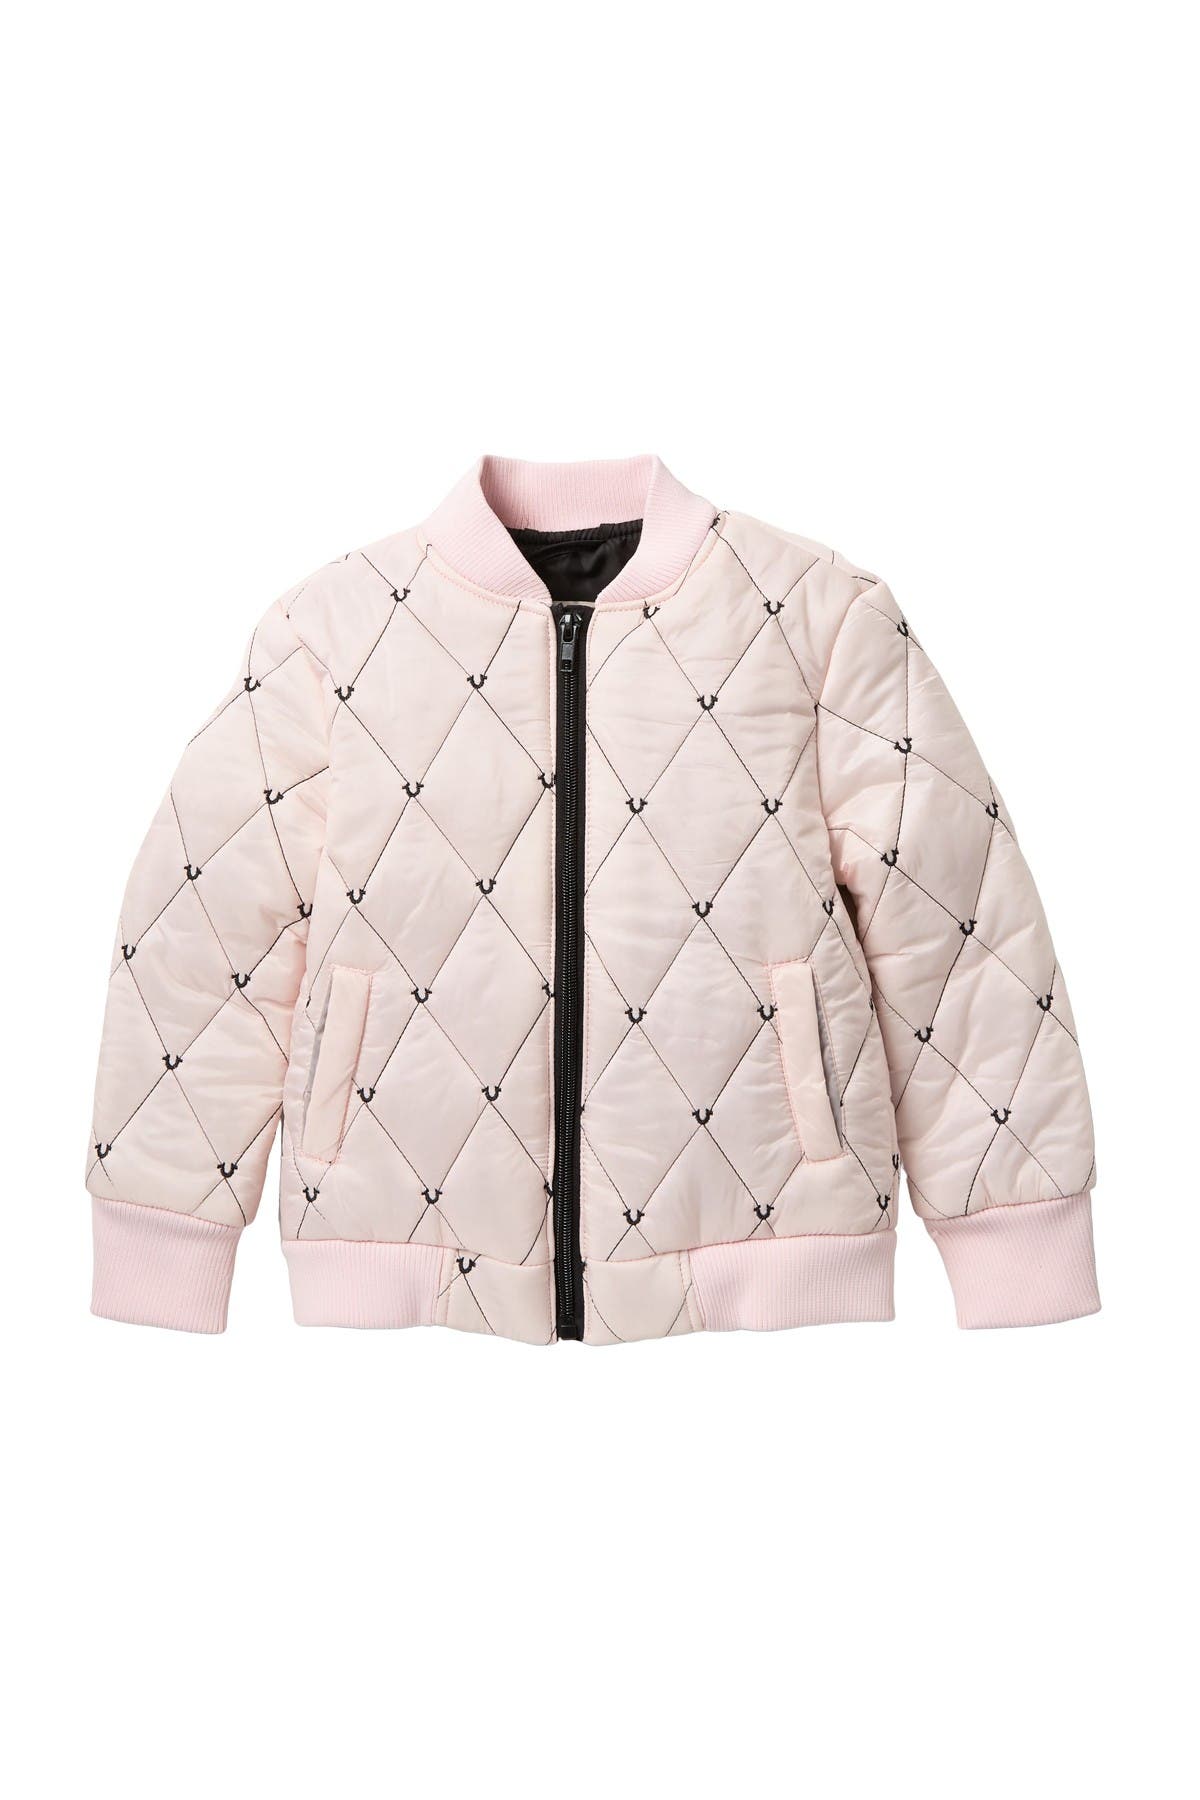 true religion quilted bomber jacket